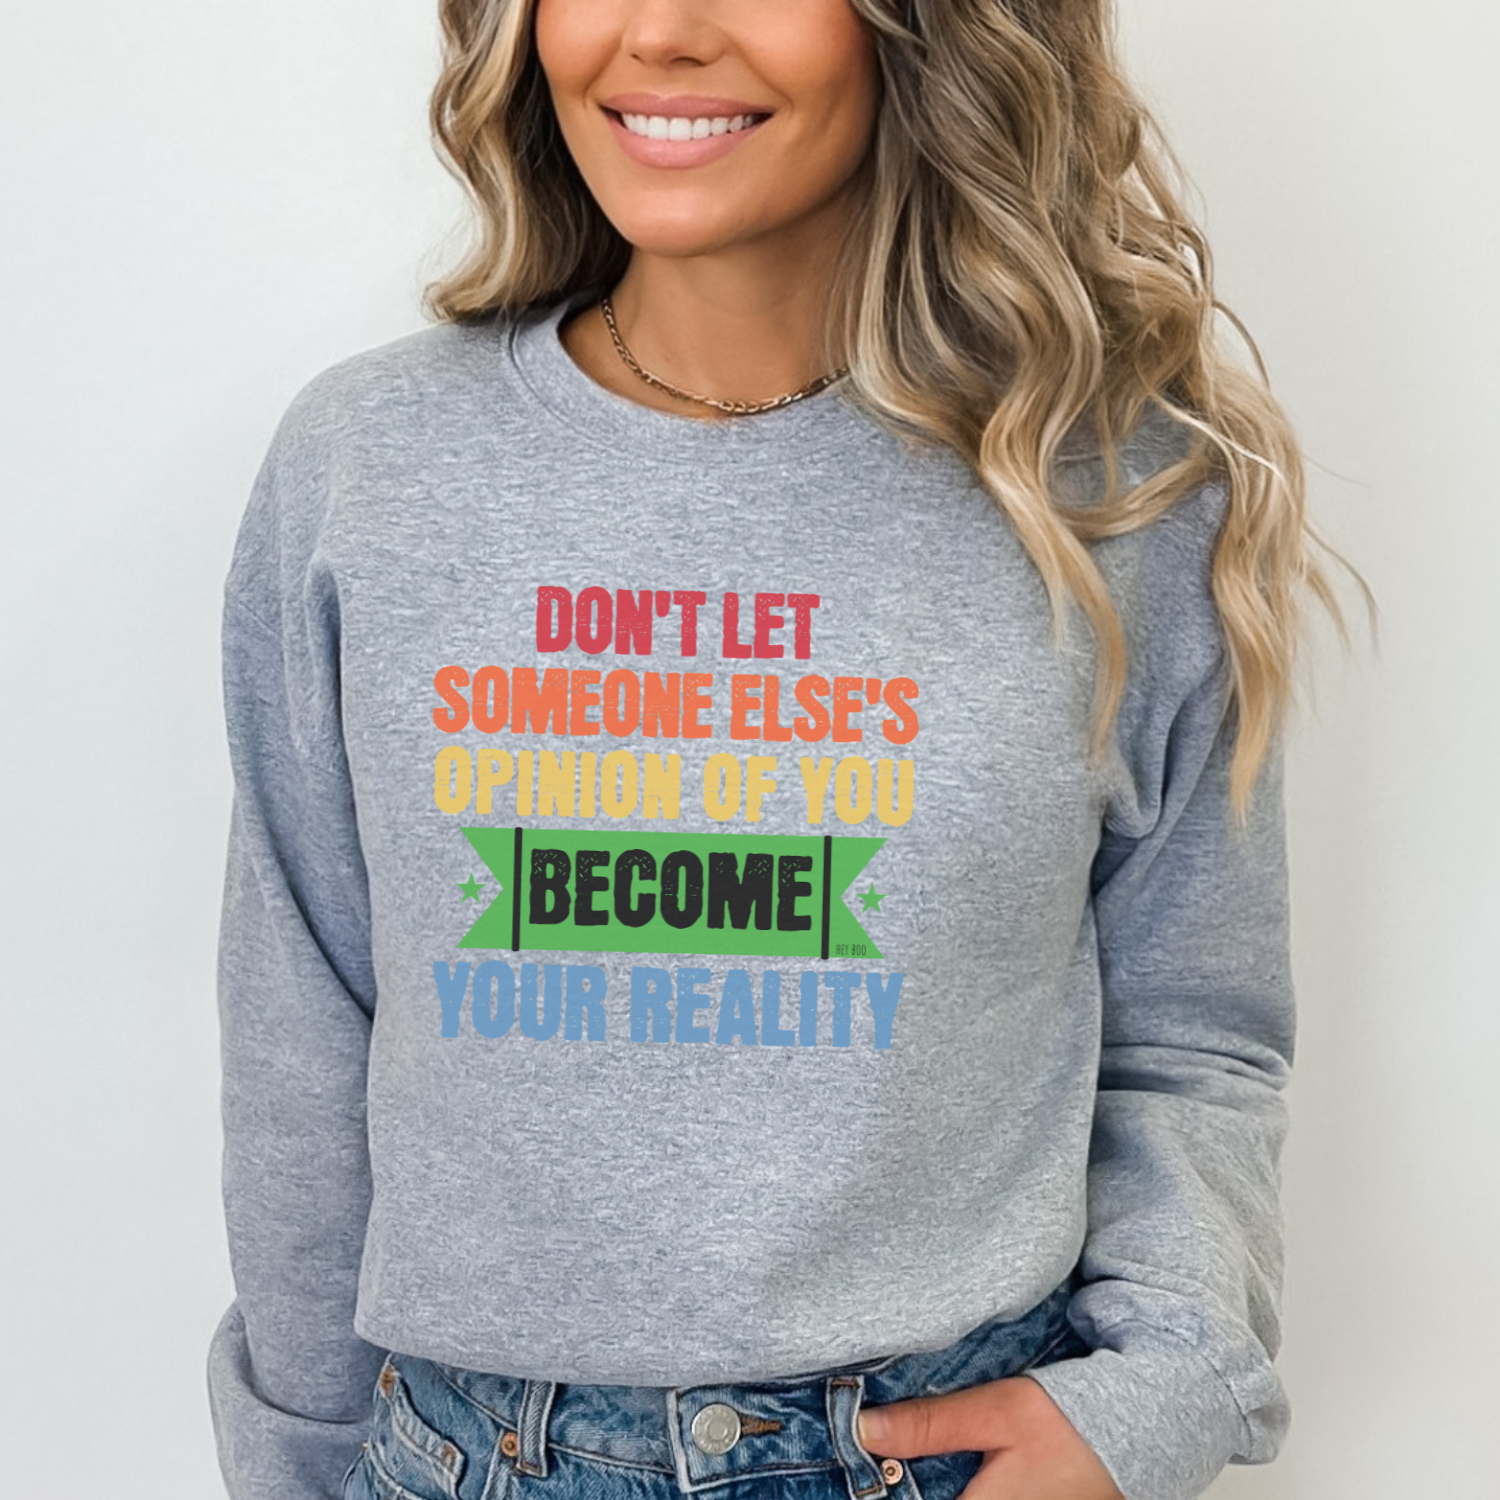 Sport Gray Gildan 18000 Sweatshirt with a meaningful directive to live your life authentically, without regard for how others might try to influence your self-worth or chosen path. 